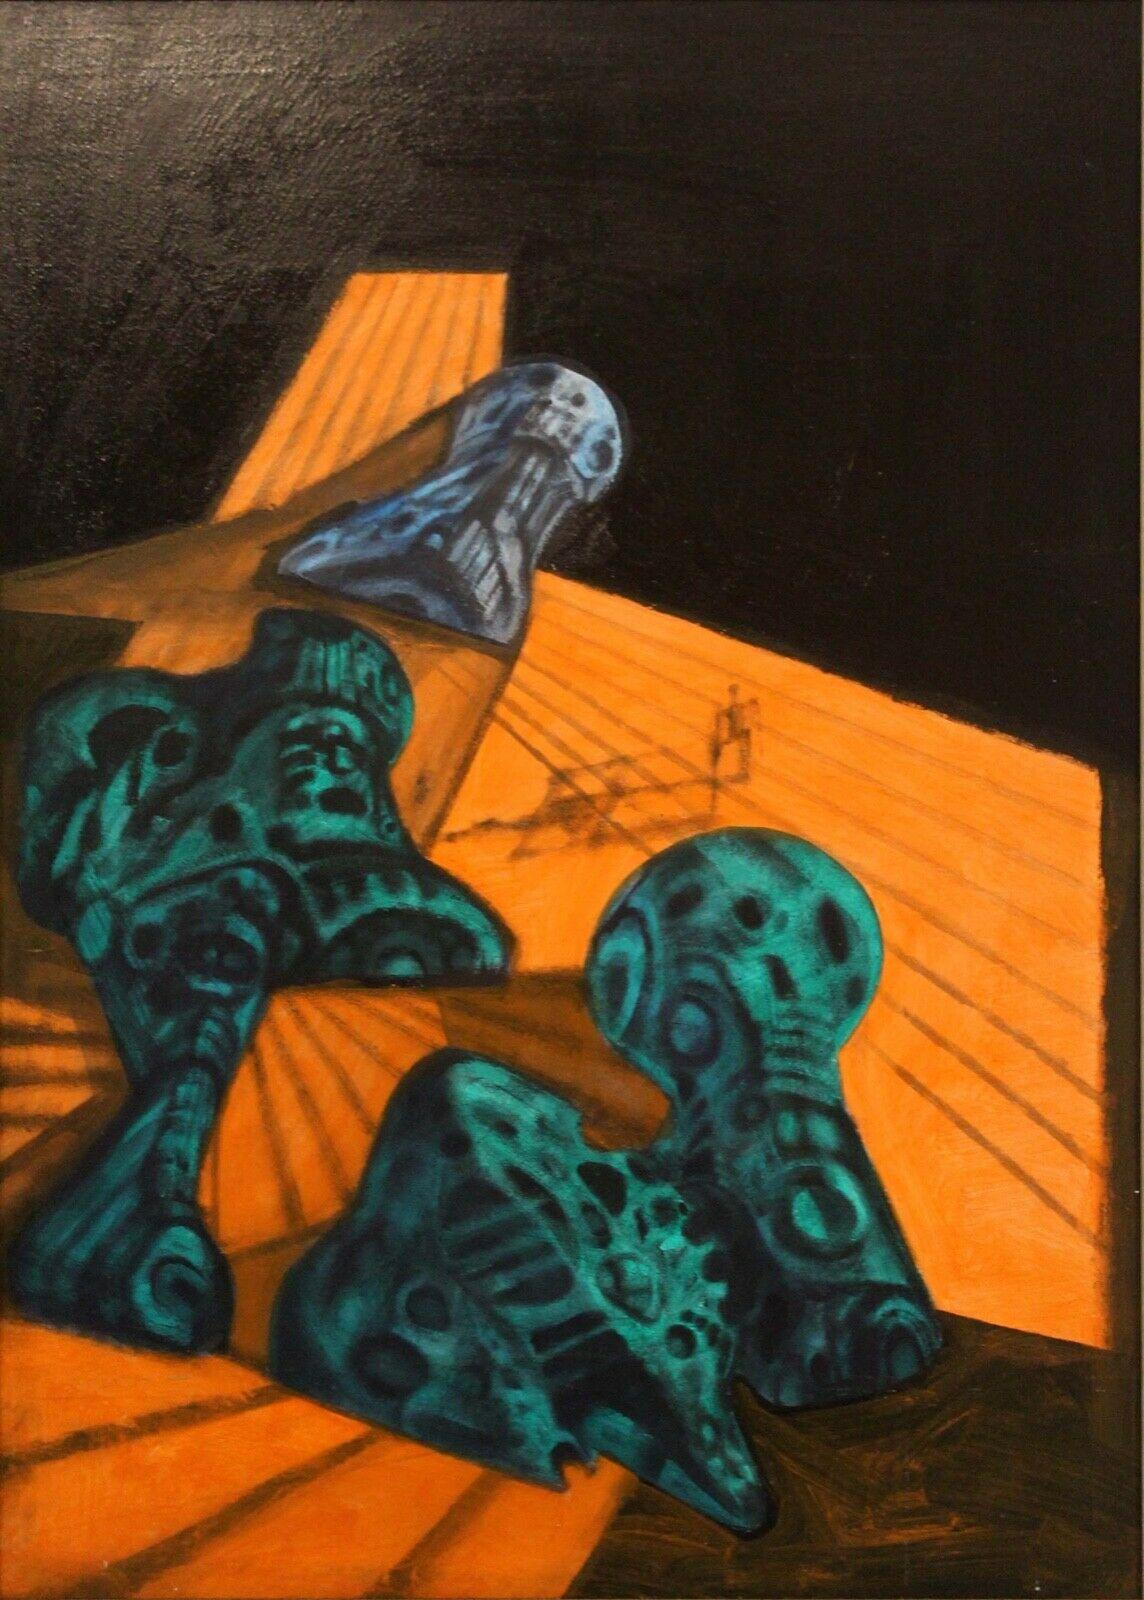 Le Shoppe Too in Michigan is offering a dynamic illustrated oil painting on panel titled Science Fiction Landscape by Richard Powers. The bright teal and orange otherworldly surreal figures contrast against the stark black background. This painting